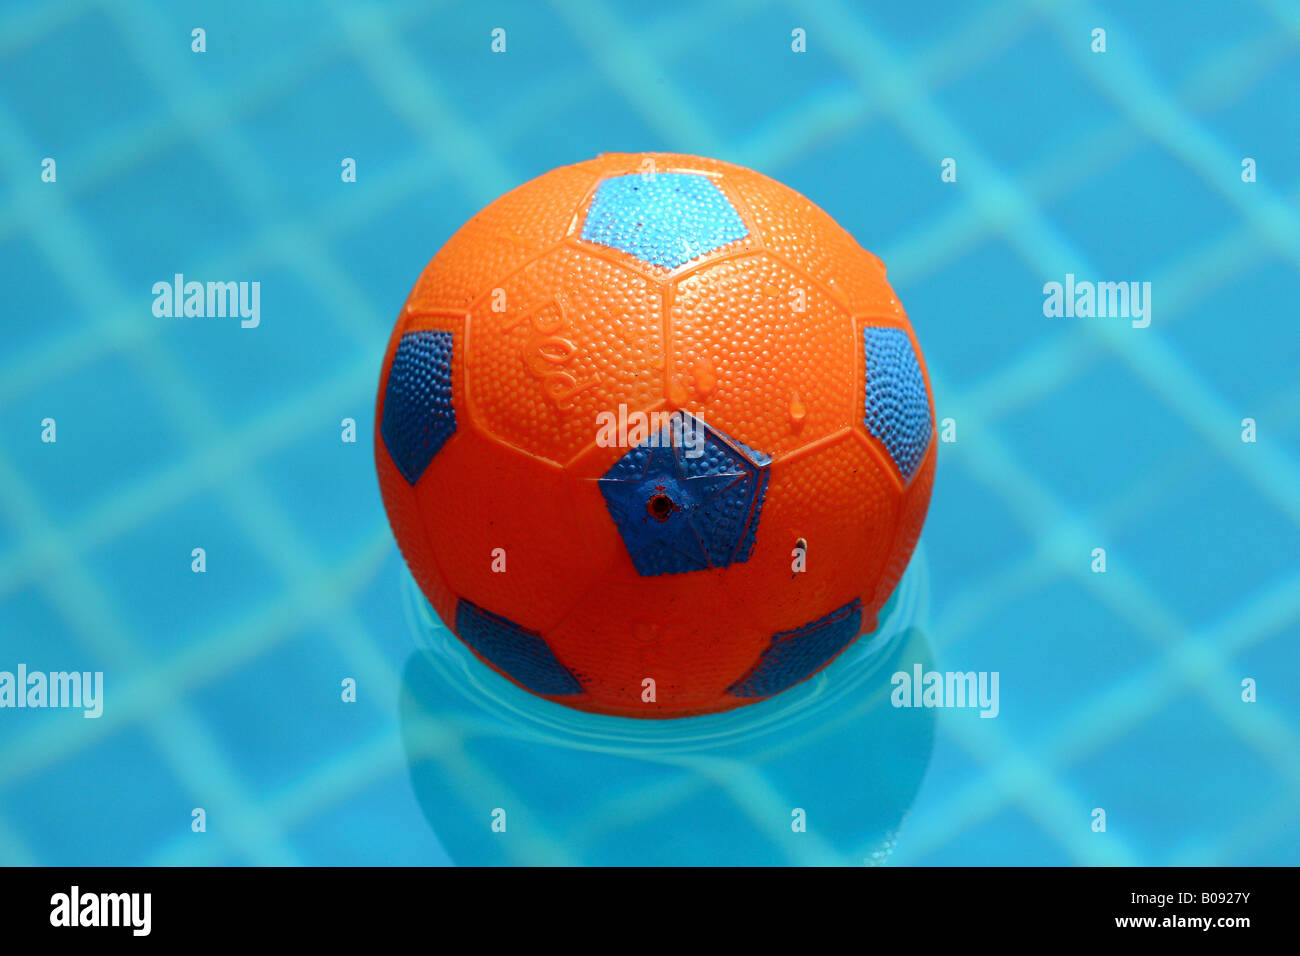 Football Pools High Resolution Stock Photography and Images - Alamy